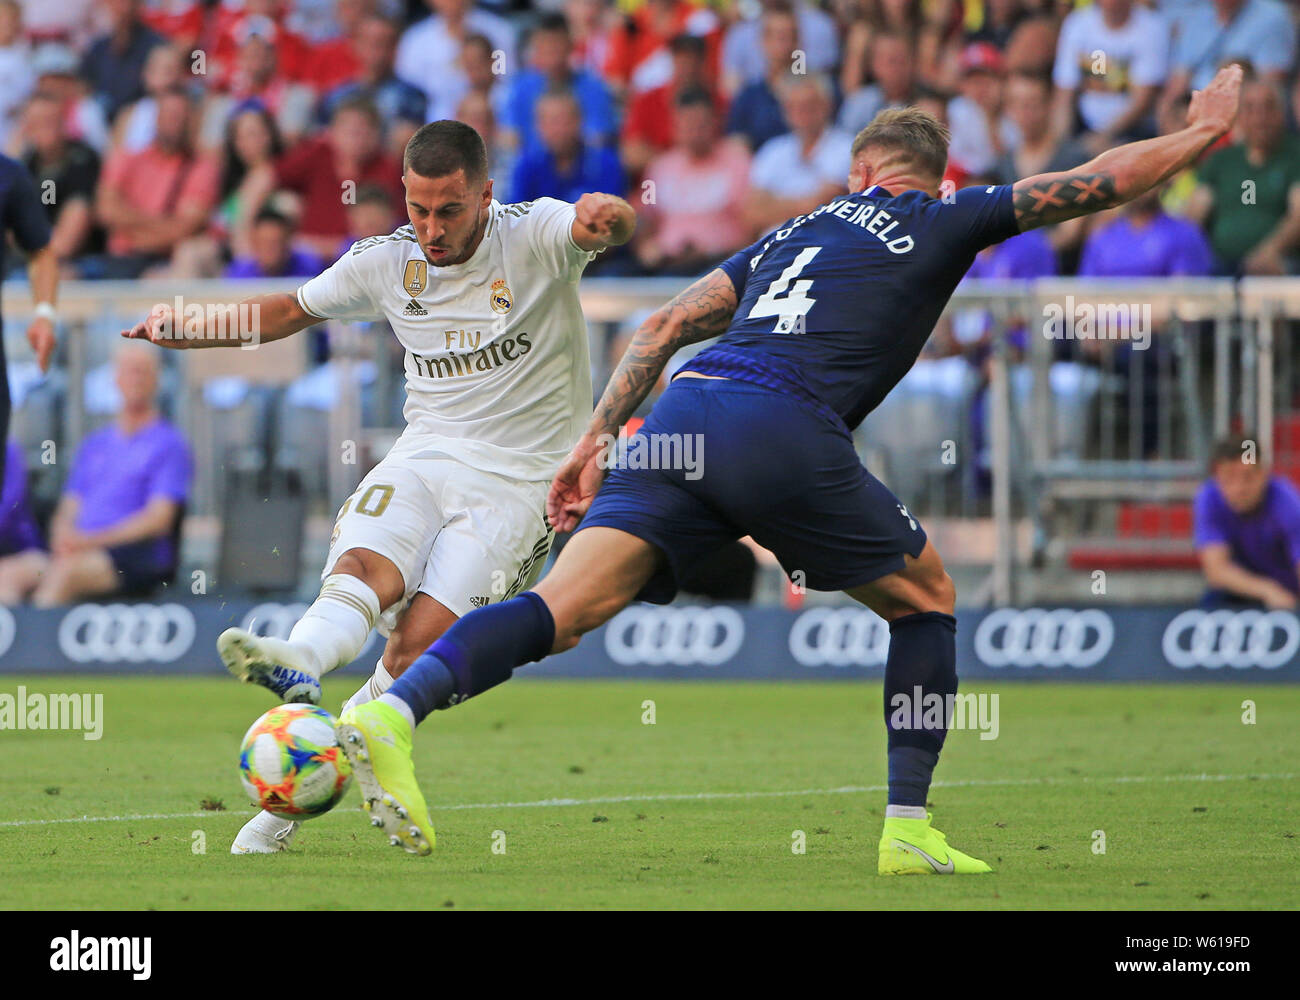 (190731) -- MUNICH, July 31, 2019 (Xinhua) -- Eden Hazard (L) of Real Madrid takes a shot under the defense from Toby Alderweireld of Tottenham Hotspur during their Audi Cup semifinal match in Munich, Germany, on July 30, 2019. Real Madrid lost 0-1. (Photo by Philippe Ruiz/Xinhua) Stock Photo